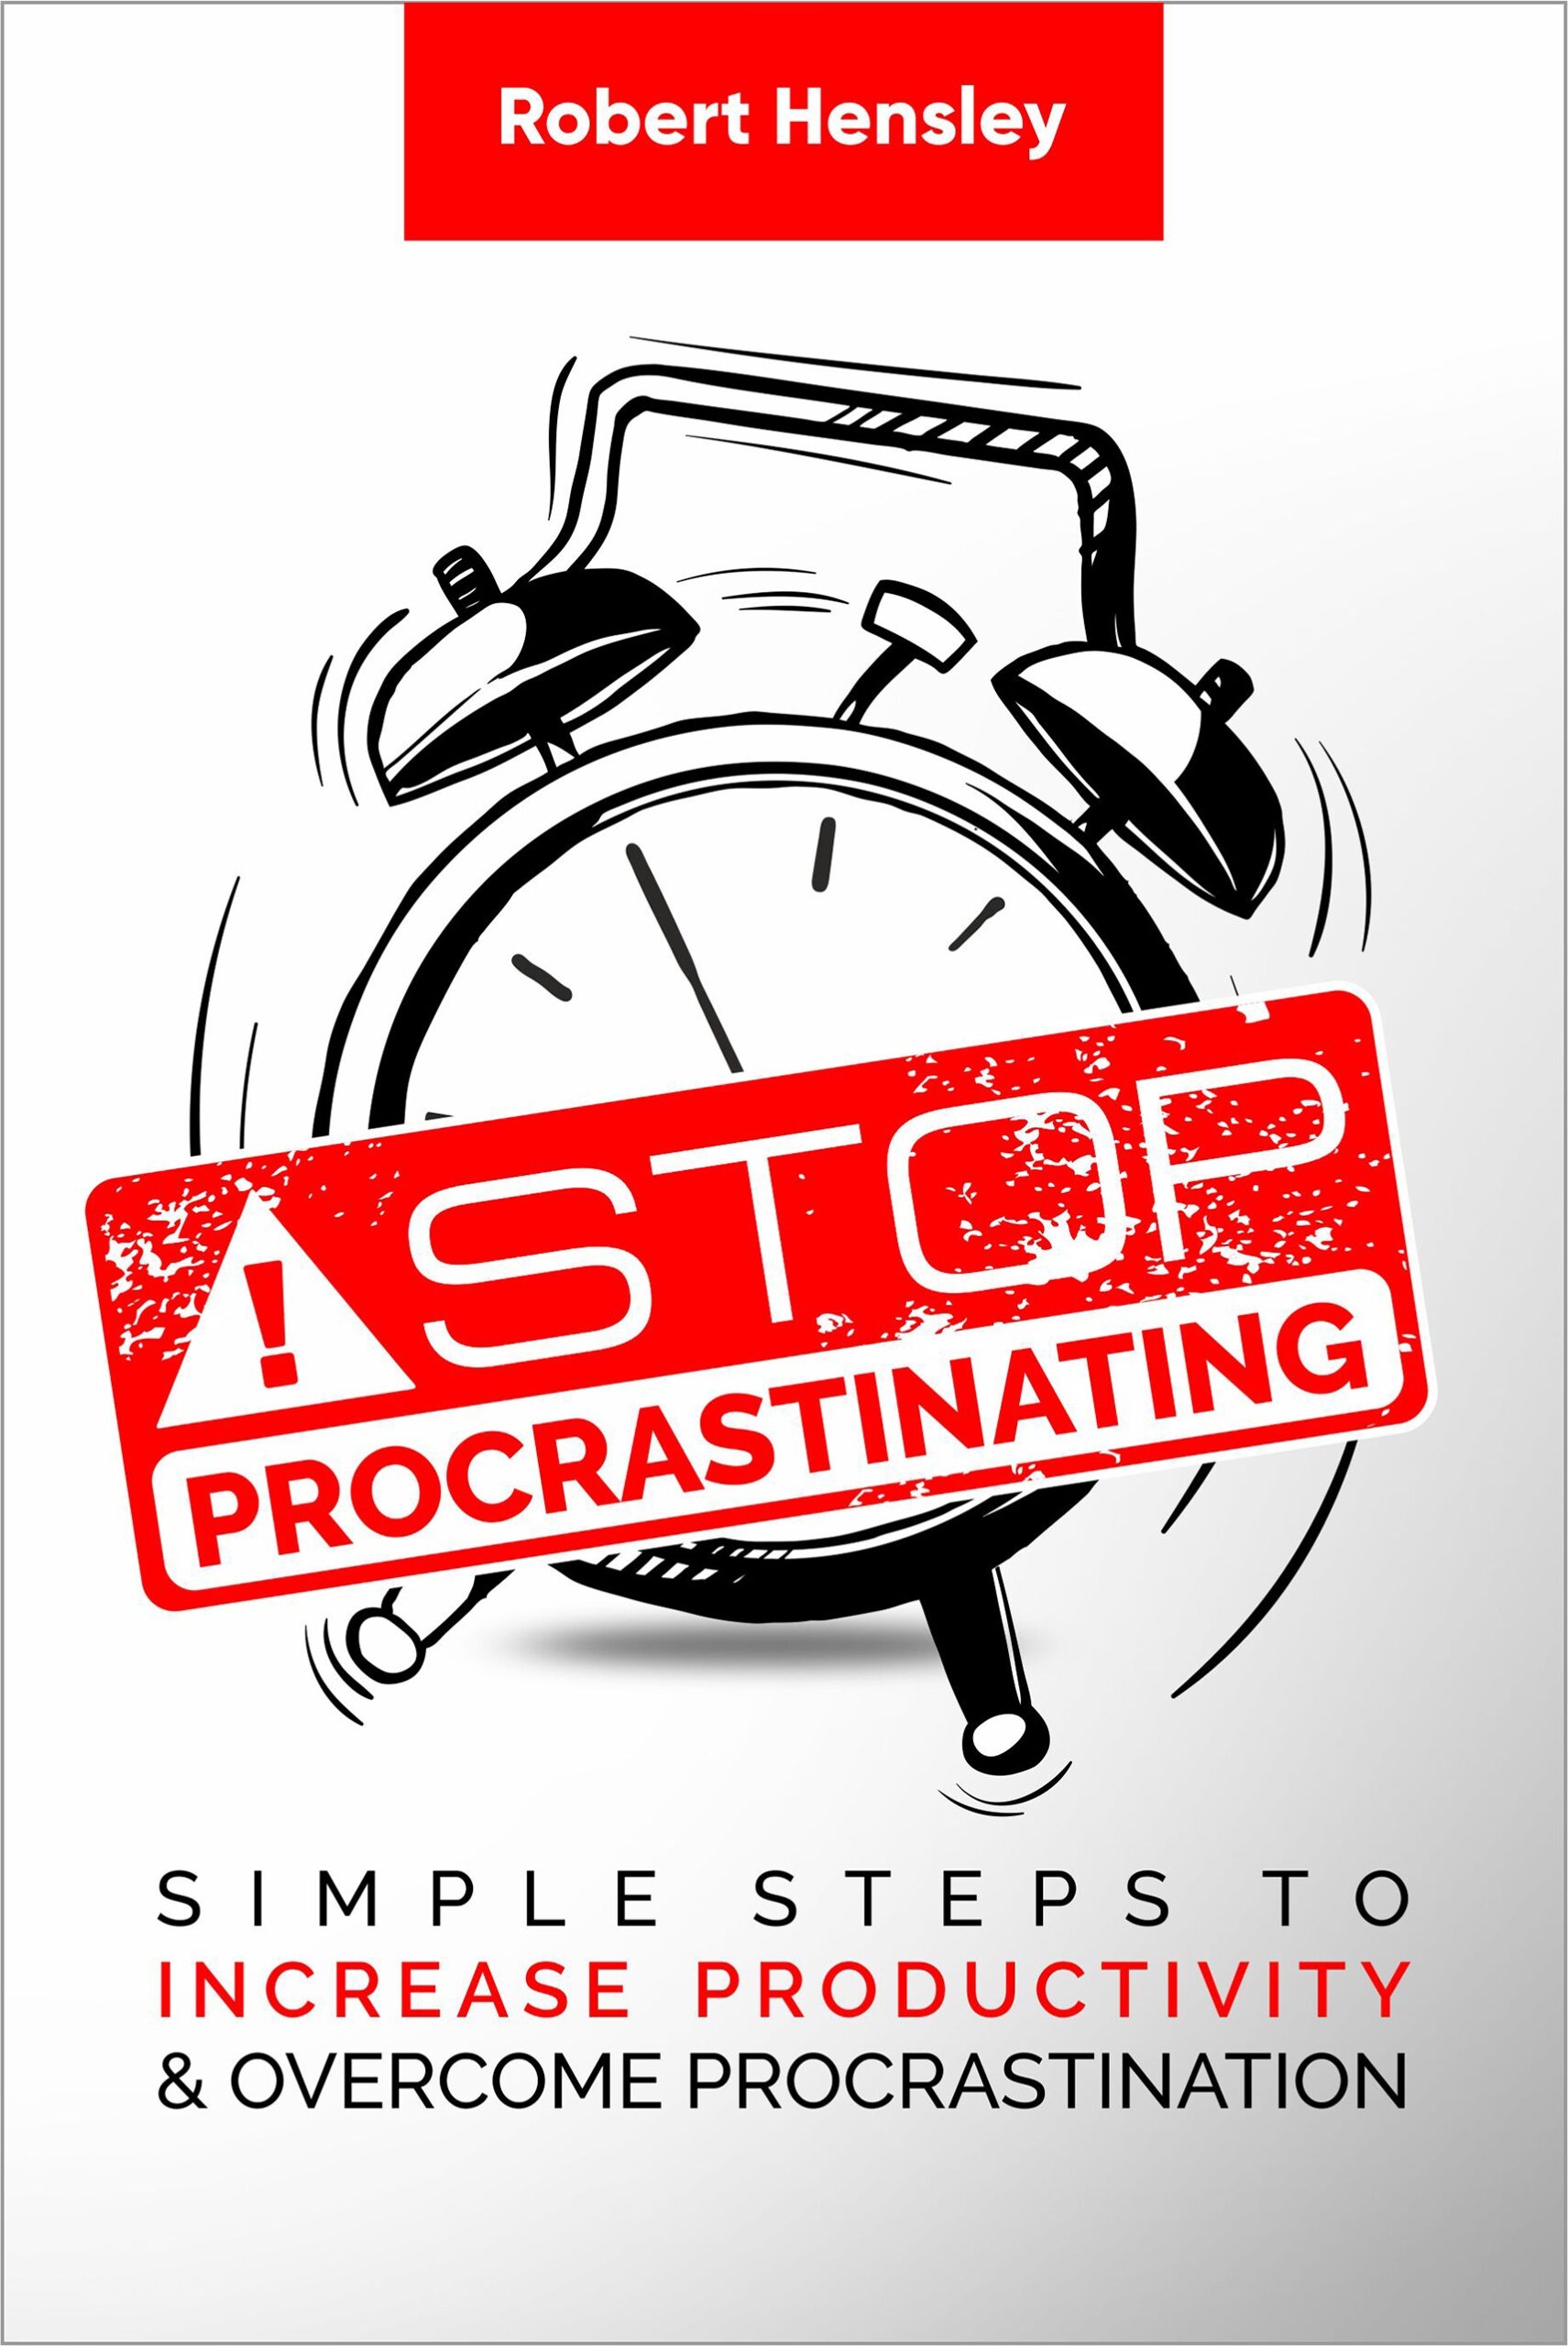 FREE: Stop Procrastinating: Simple Steps to Increase Productivity and Overcome Procrastination by Robert Hensley